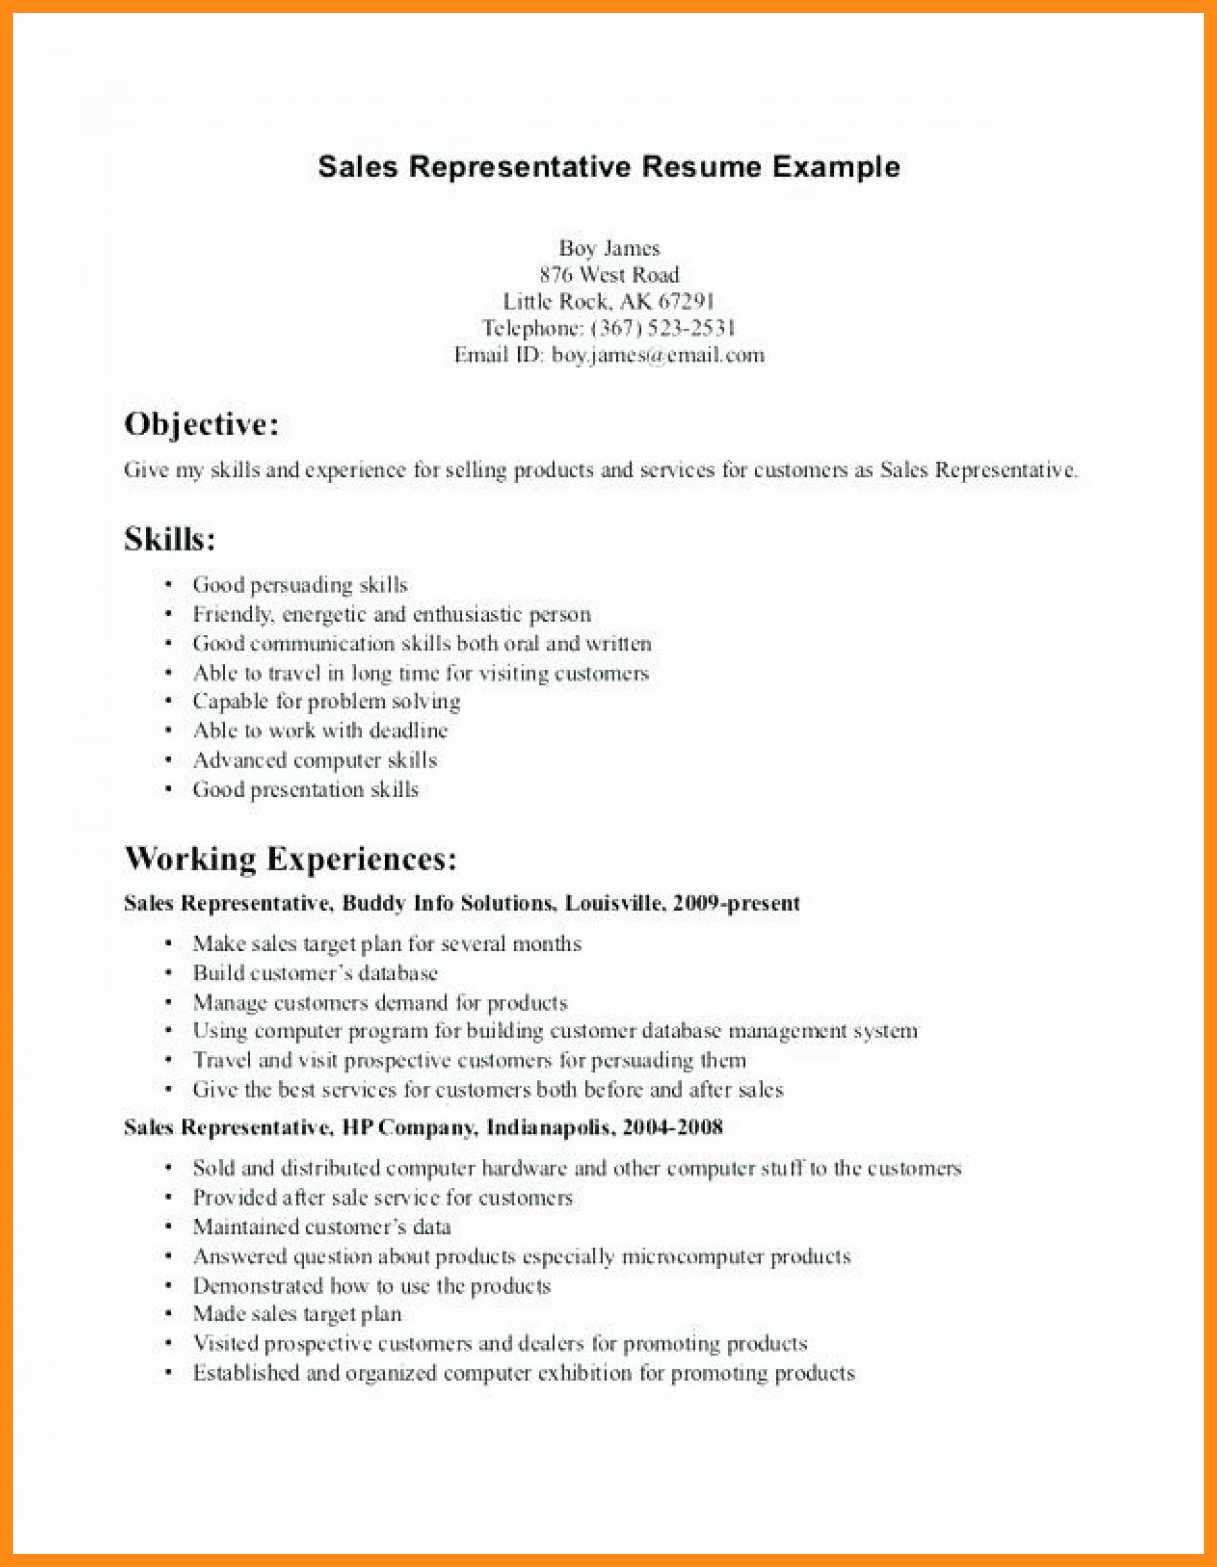 Good Skills To Put On Resume Example Of Skills To Put On A Resume Examples Of Good Skills Put On A Resume Unique Qualifications Section With Work Resumes What Include Absolute Thus 1191x1541 good skills to put on resume|wikiresume.com